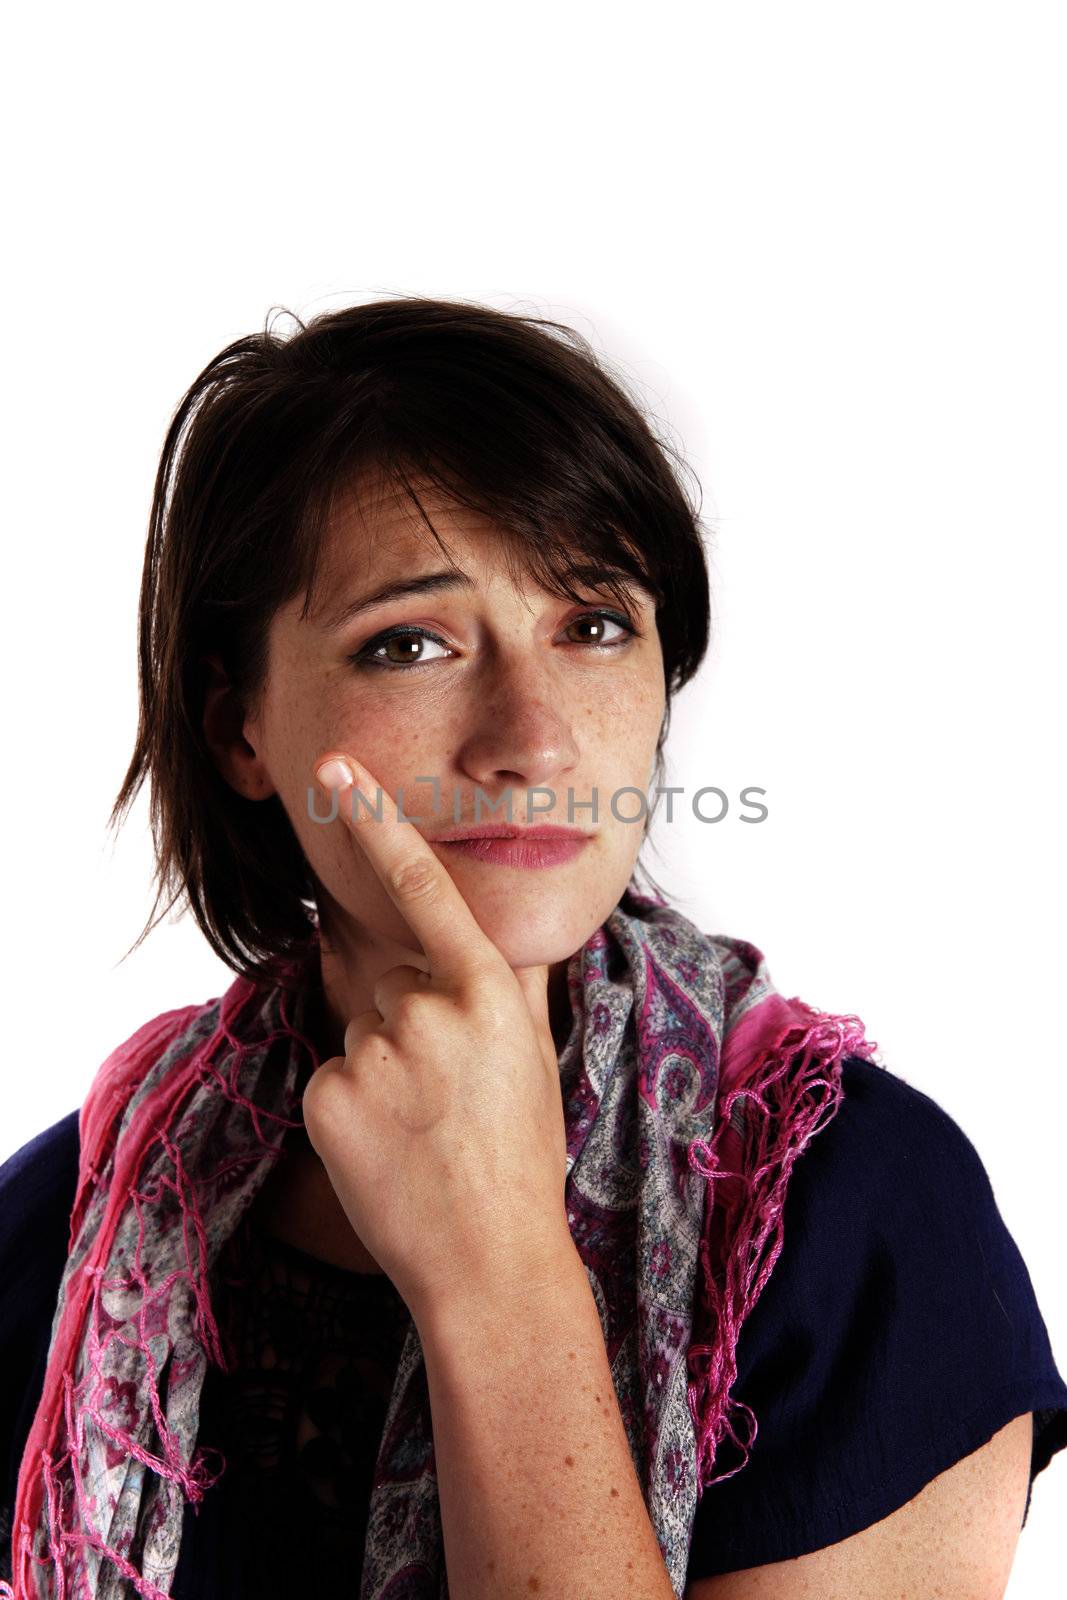 humourous portrait ogf a young woman with finger on her mouth by macintox